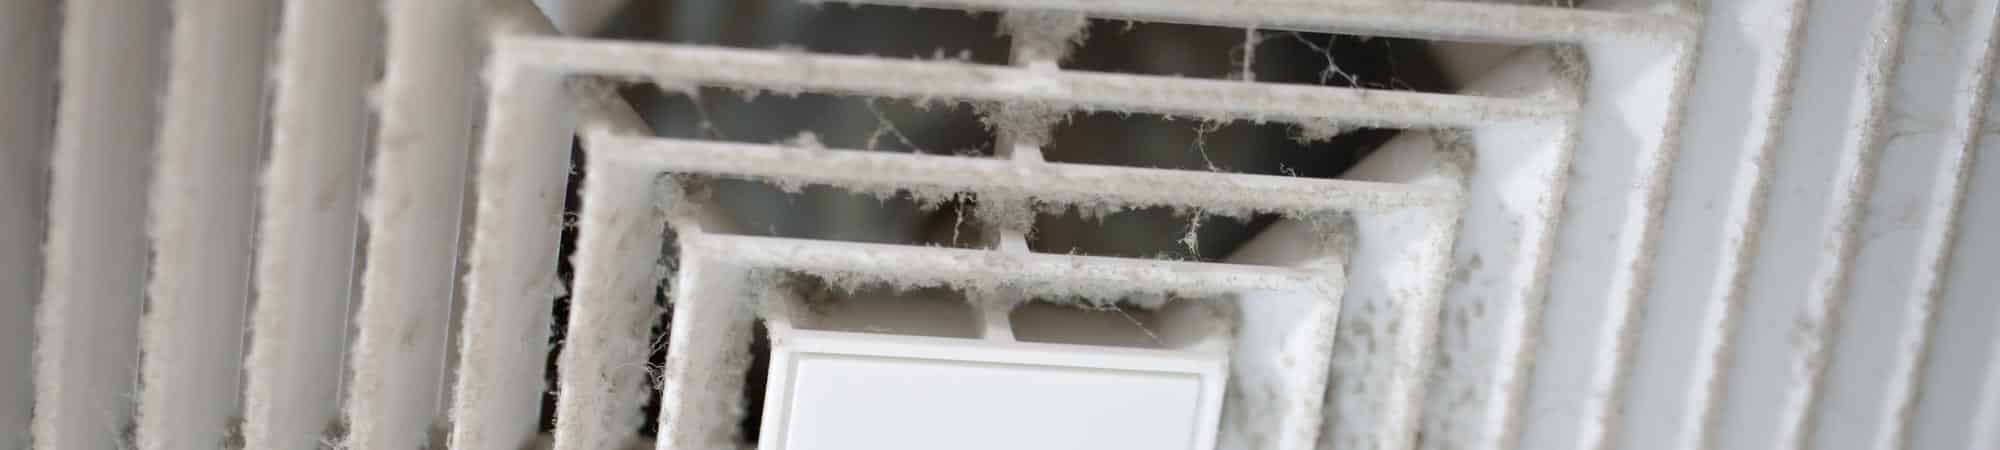 5 Reasons to Get Your Air Ducts Cleaned Before Winter